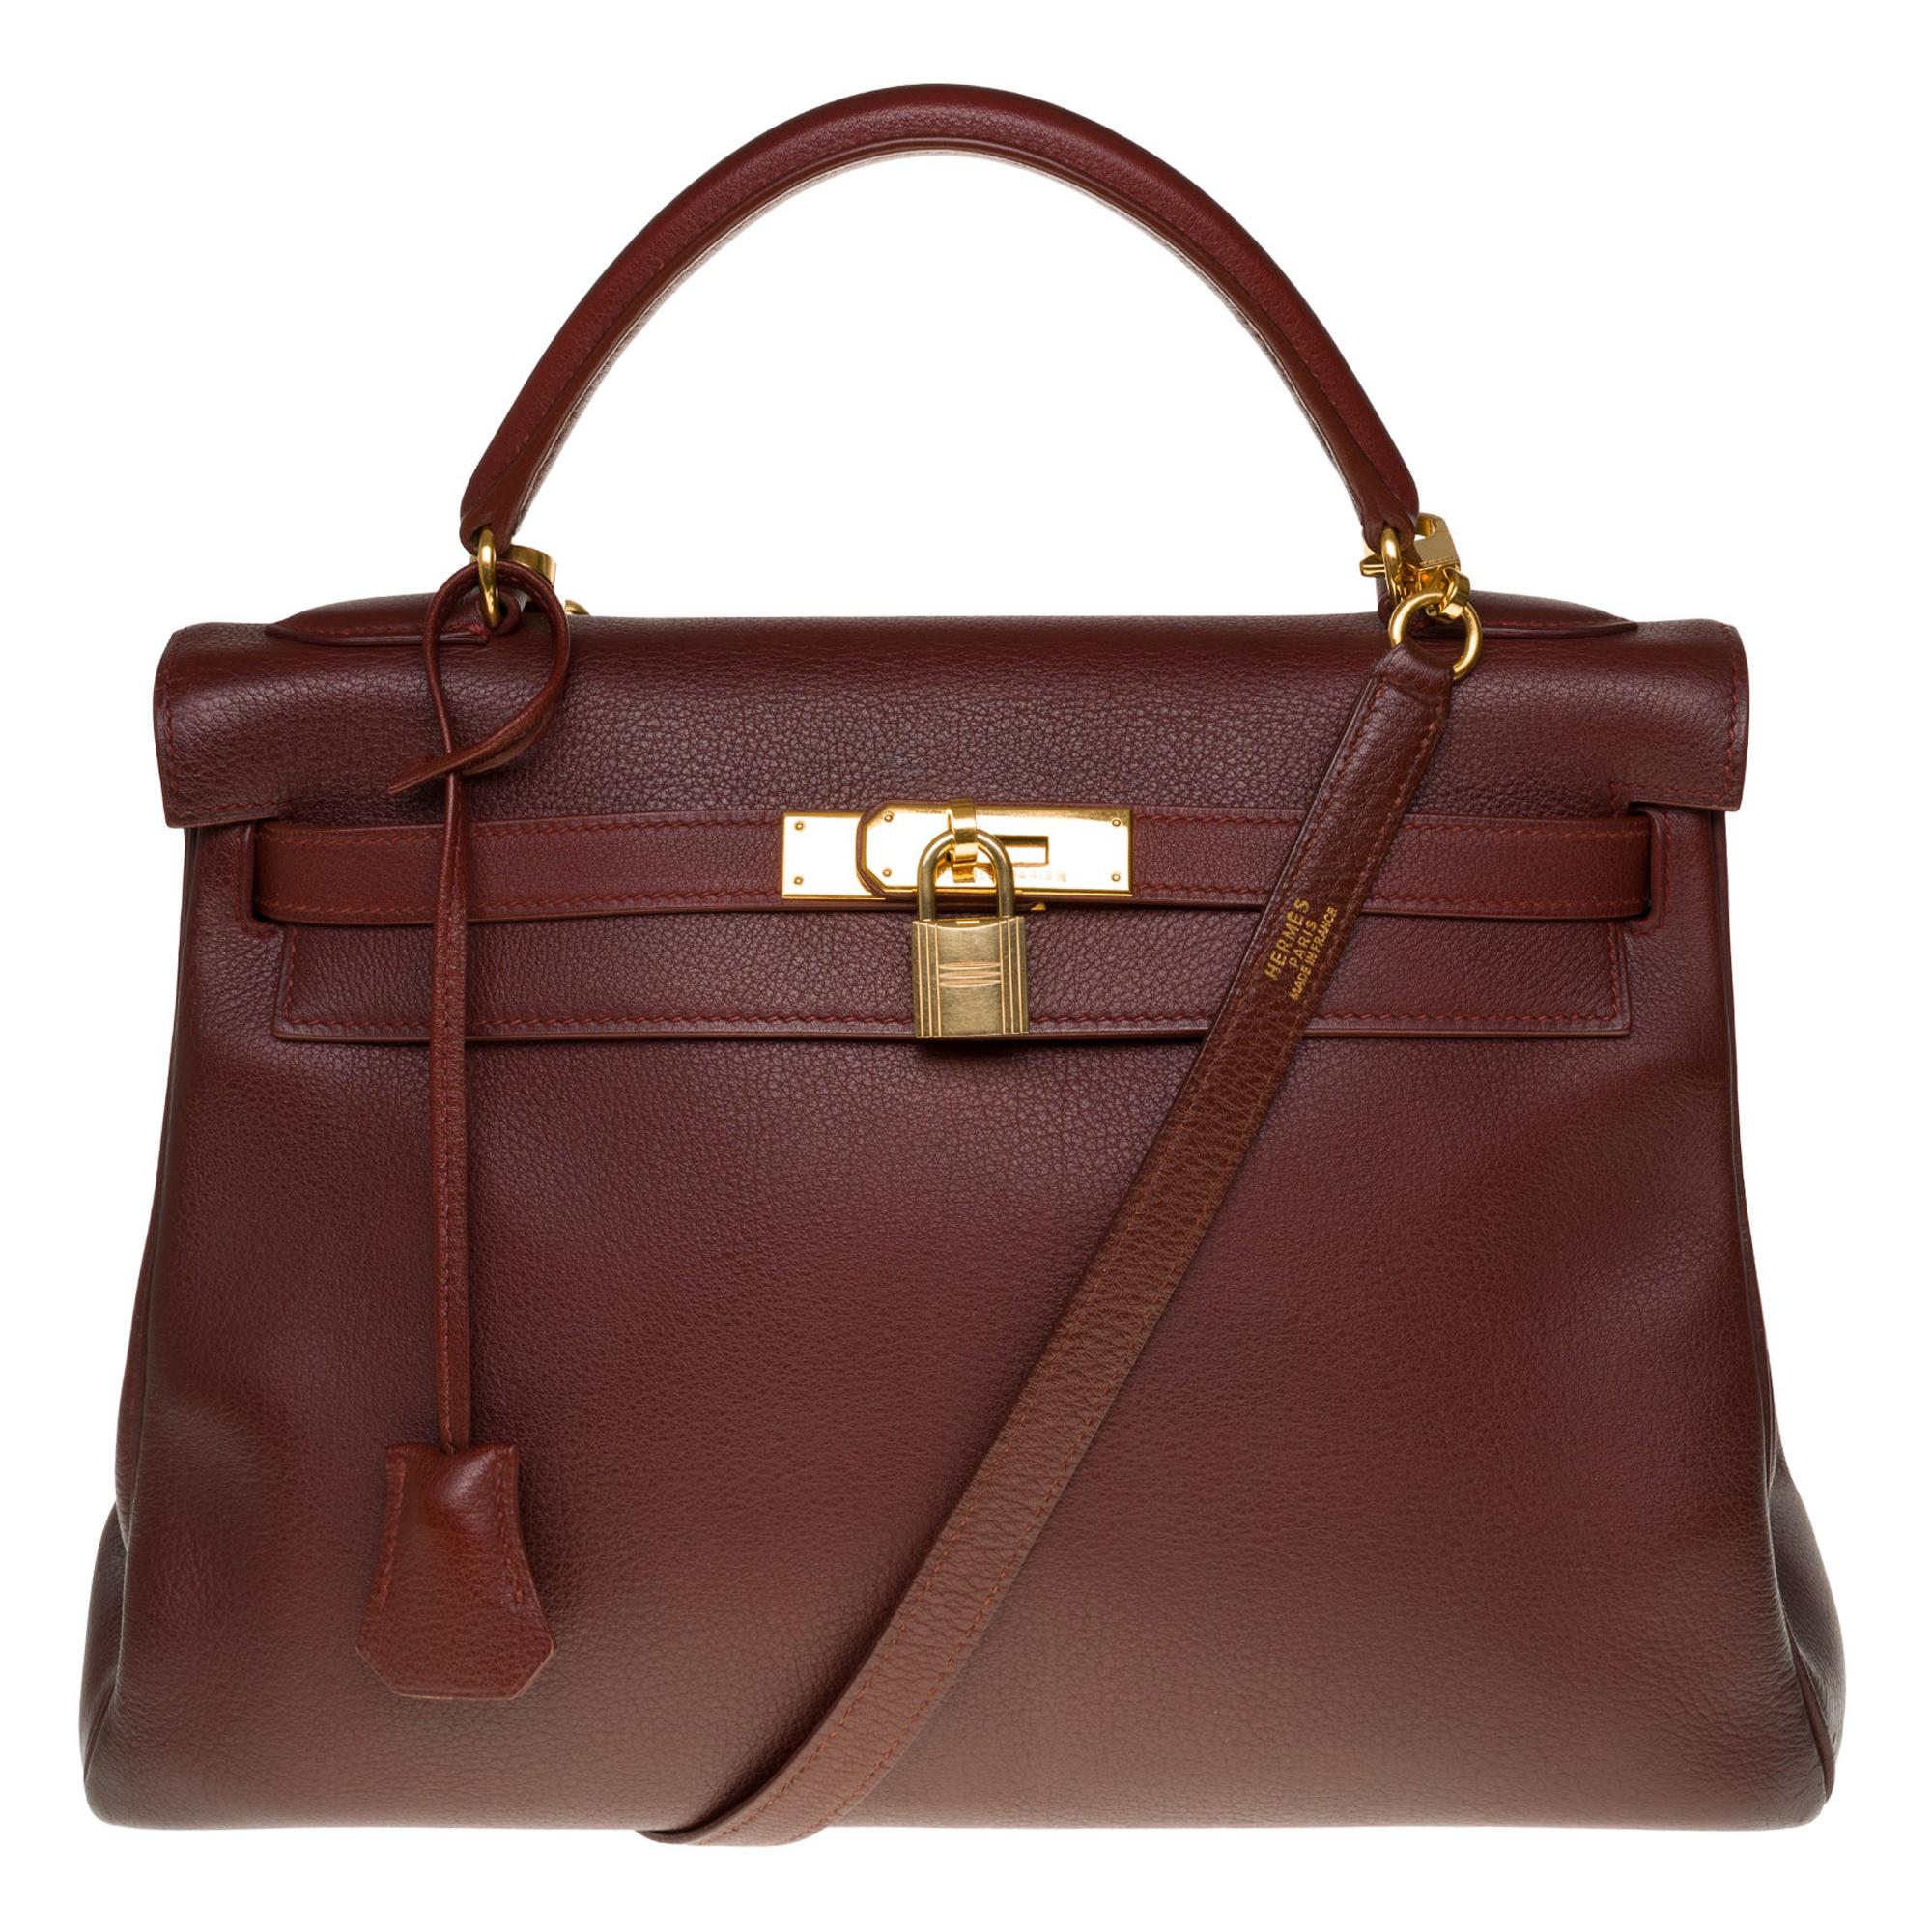 Hermès Kelly 32cm handbag with strap in brown Mysore Goat leather and GHW